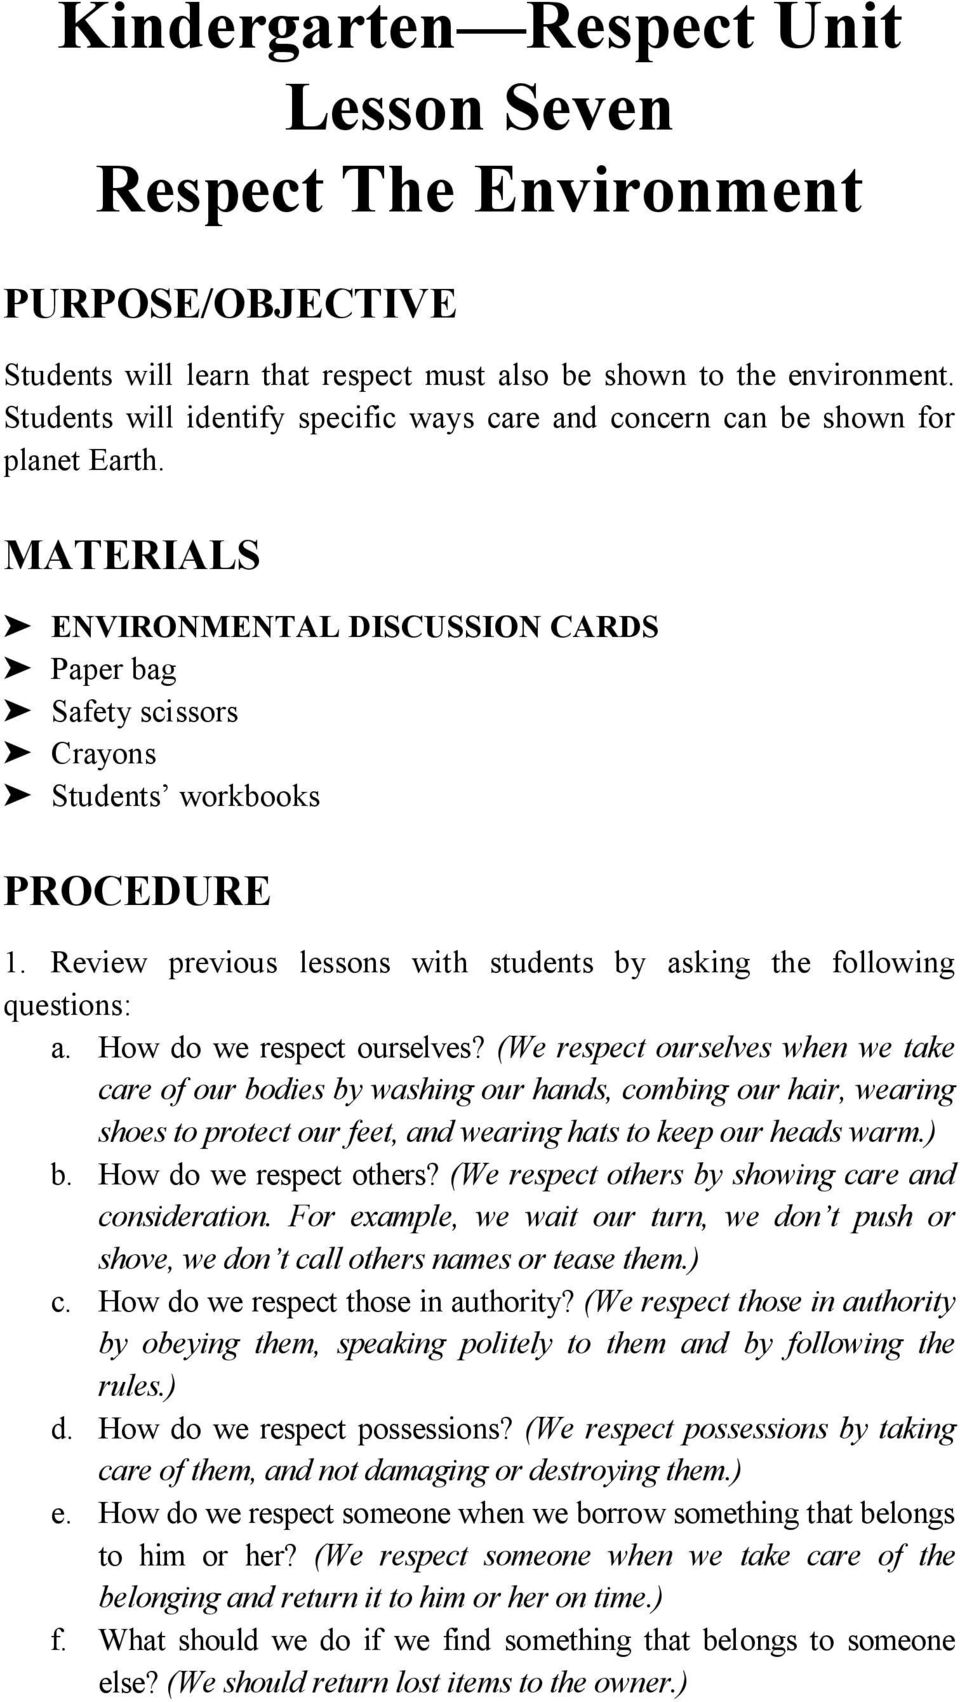 MATERIALS ' ENVIRONMENTAL DISCUSSION CARDS ' Paper bag ' Safety scissors ' Crayons ' Students workbooks PROCEDURE 1. Review previous lessons with students by asking the following questions: a.